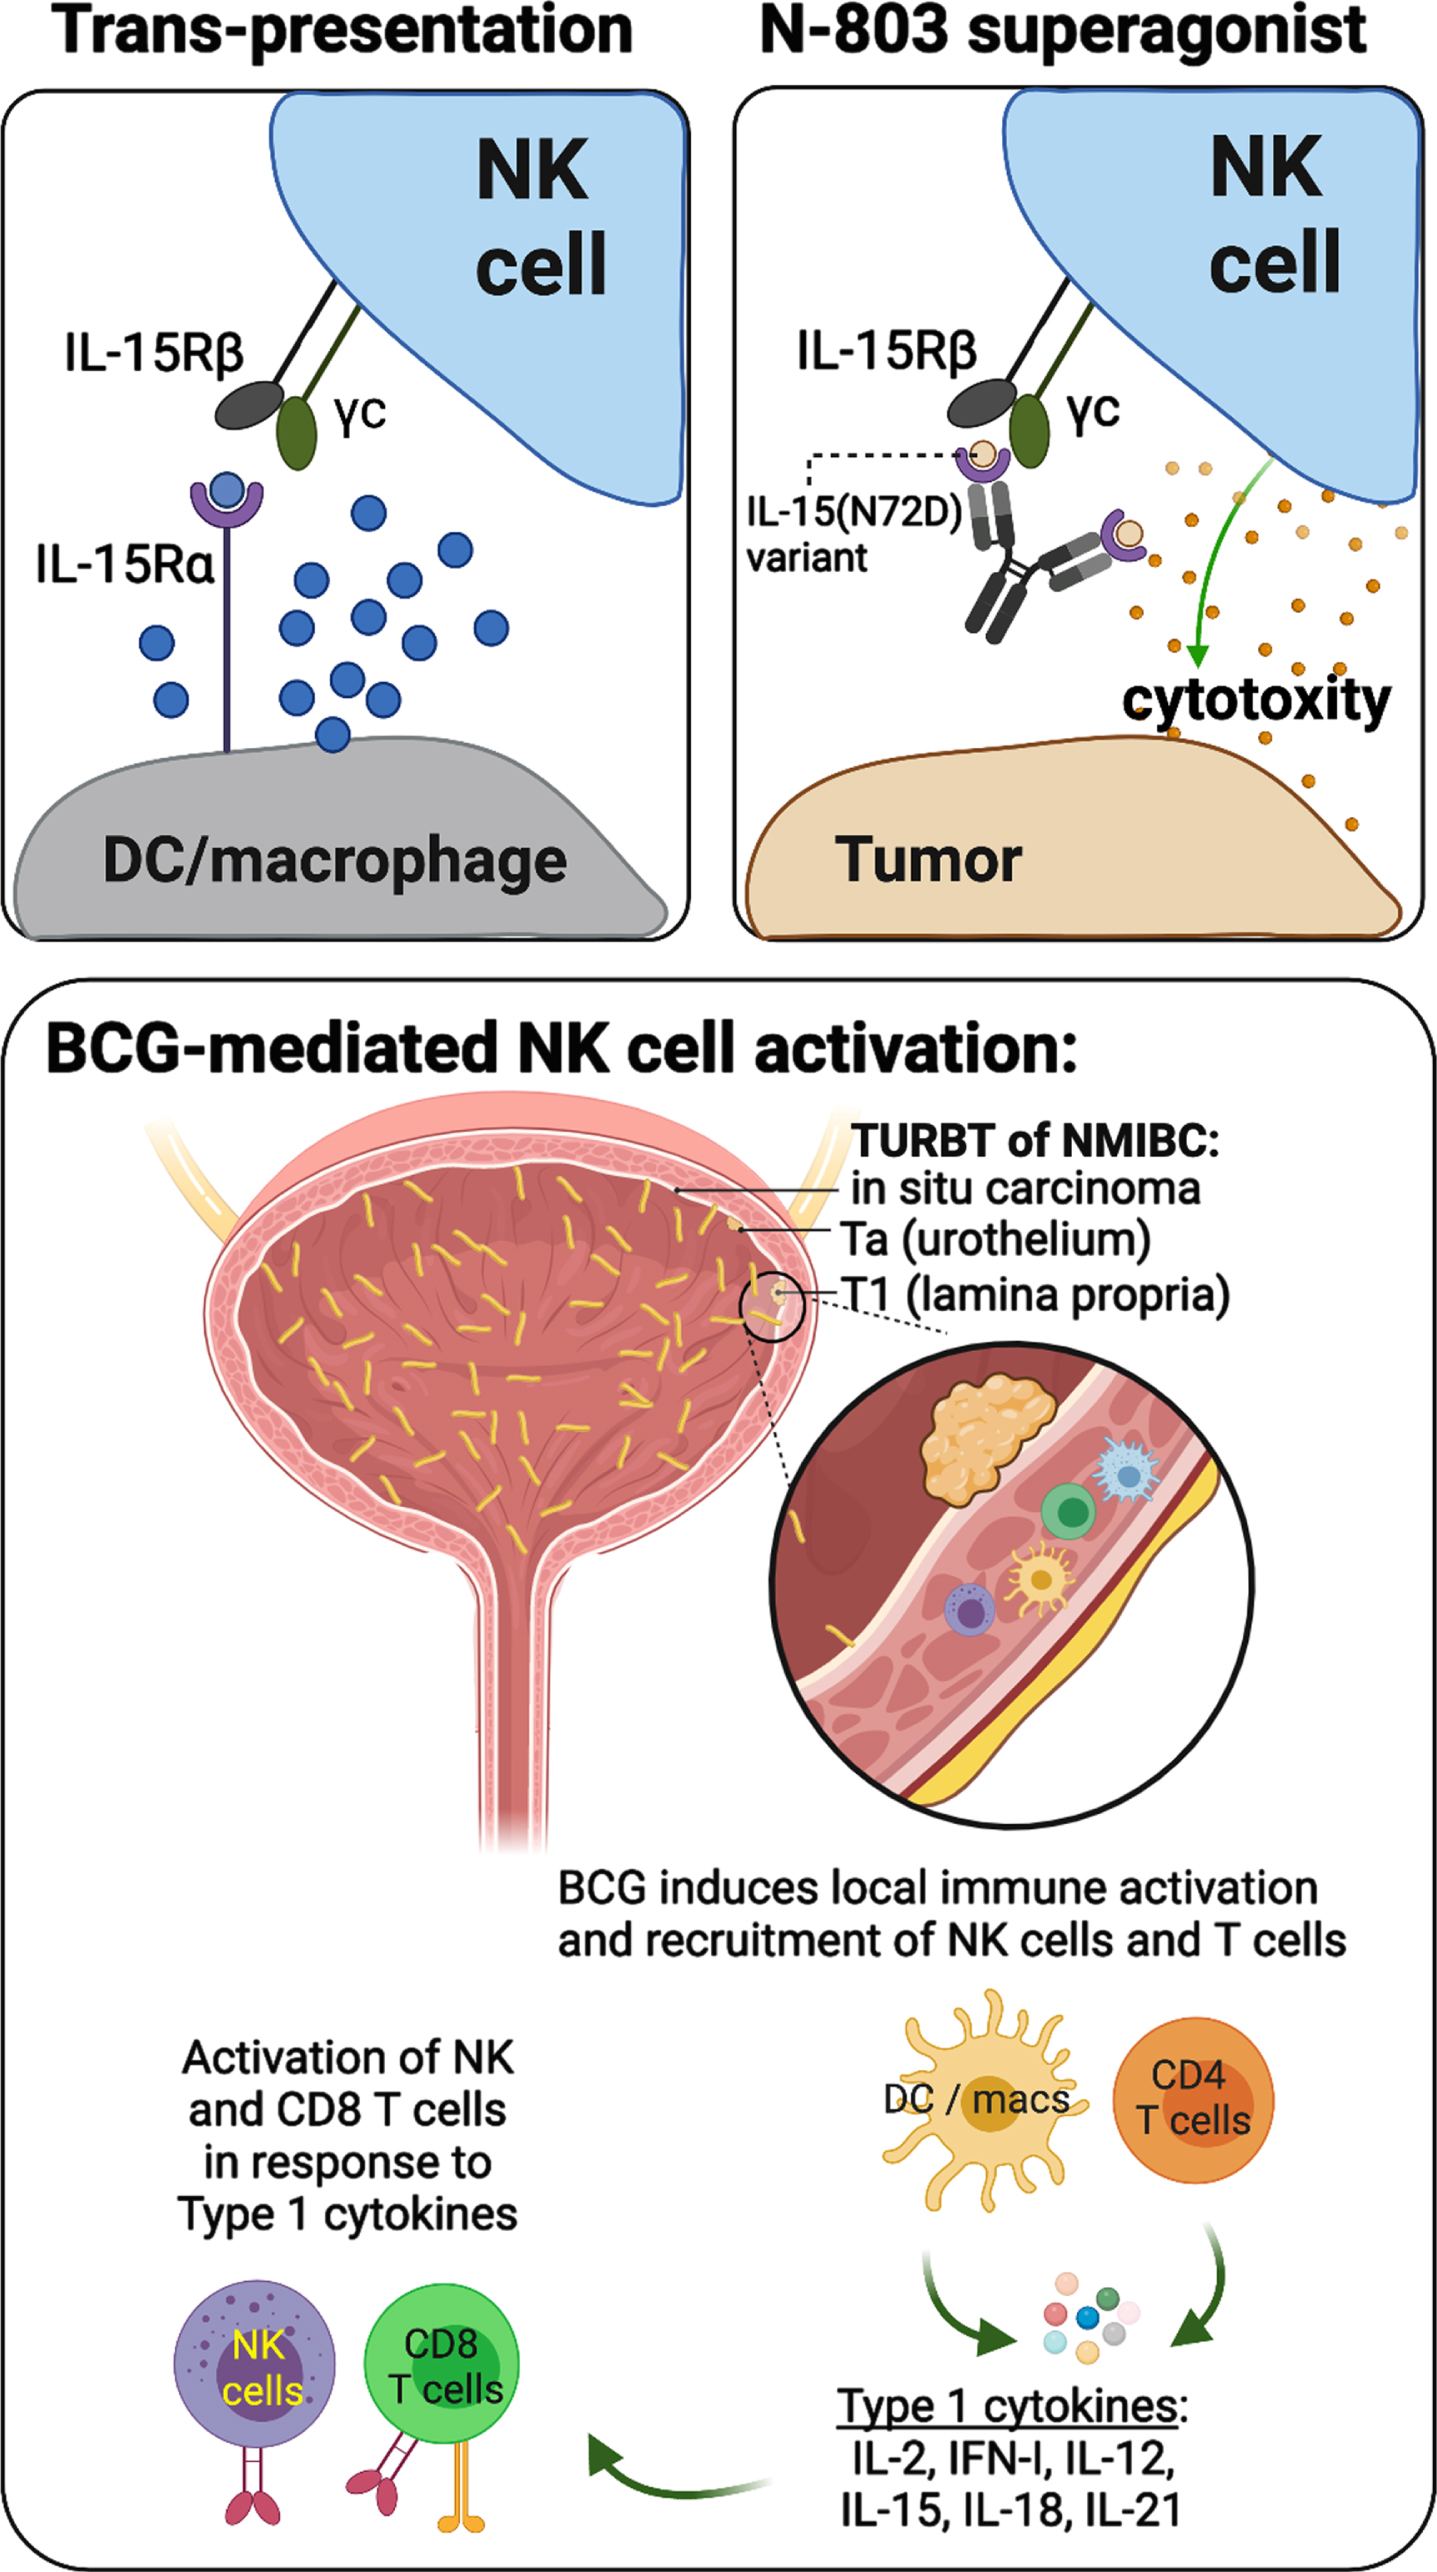 Schematic representations describing the mechanisms of IL-15 trans-presentation and activation of NK cells (upper left), the mechanisms of action underlying N-803 IL-15/IL-15Rα superagonist (upper right), and a working model of BCG-mediated activation of NK and CD8 T cells, which relies on indirect stimulation by dendritic cells (DCs), macrophages (macs), and CD4 T cells through production of type 1 cytokines.